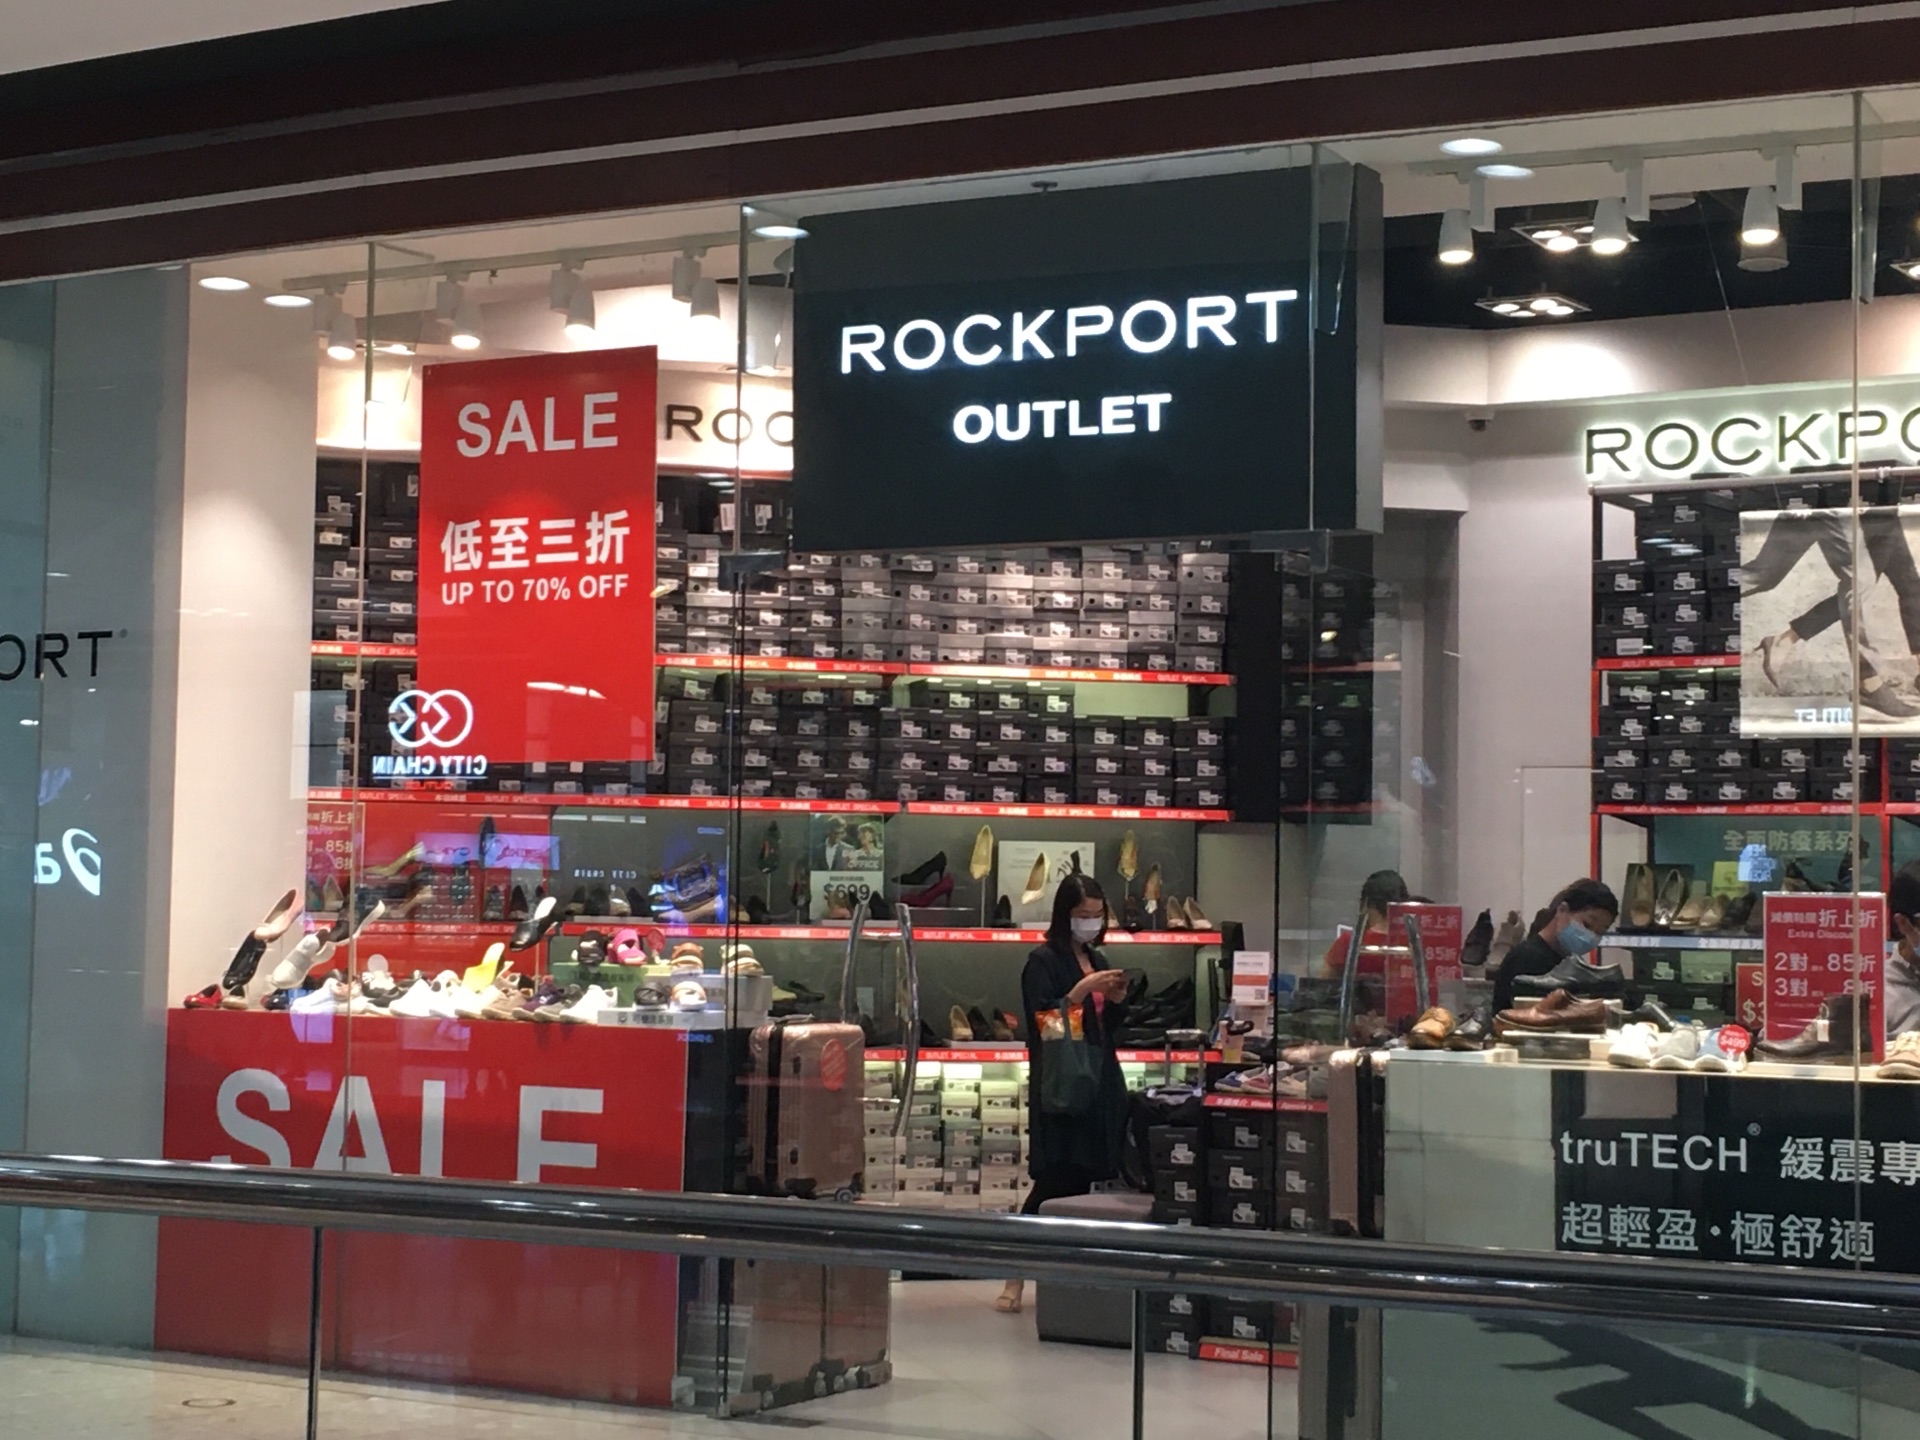 Shopping itineraries in Rockport Outlet in 2023-06-29T17:00:00-07:00  (updated in 2023-06-29T17:00:00-07:00) - Trip.com